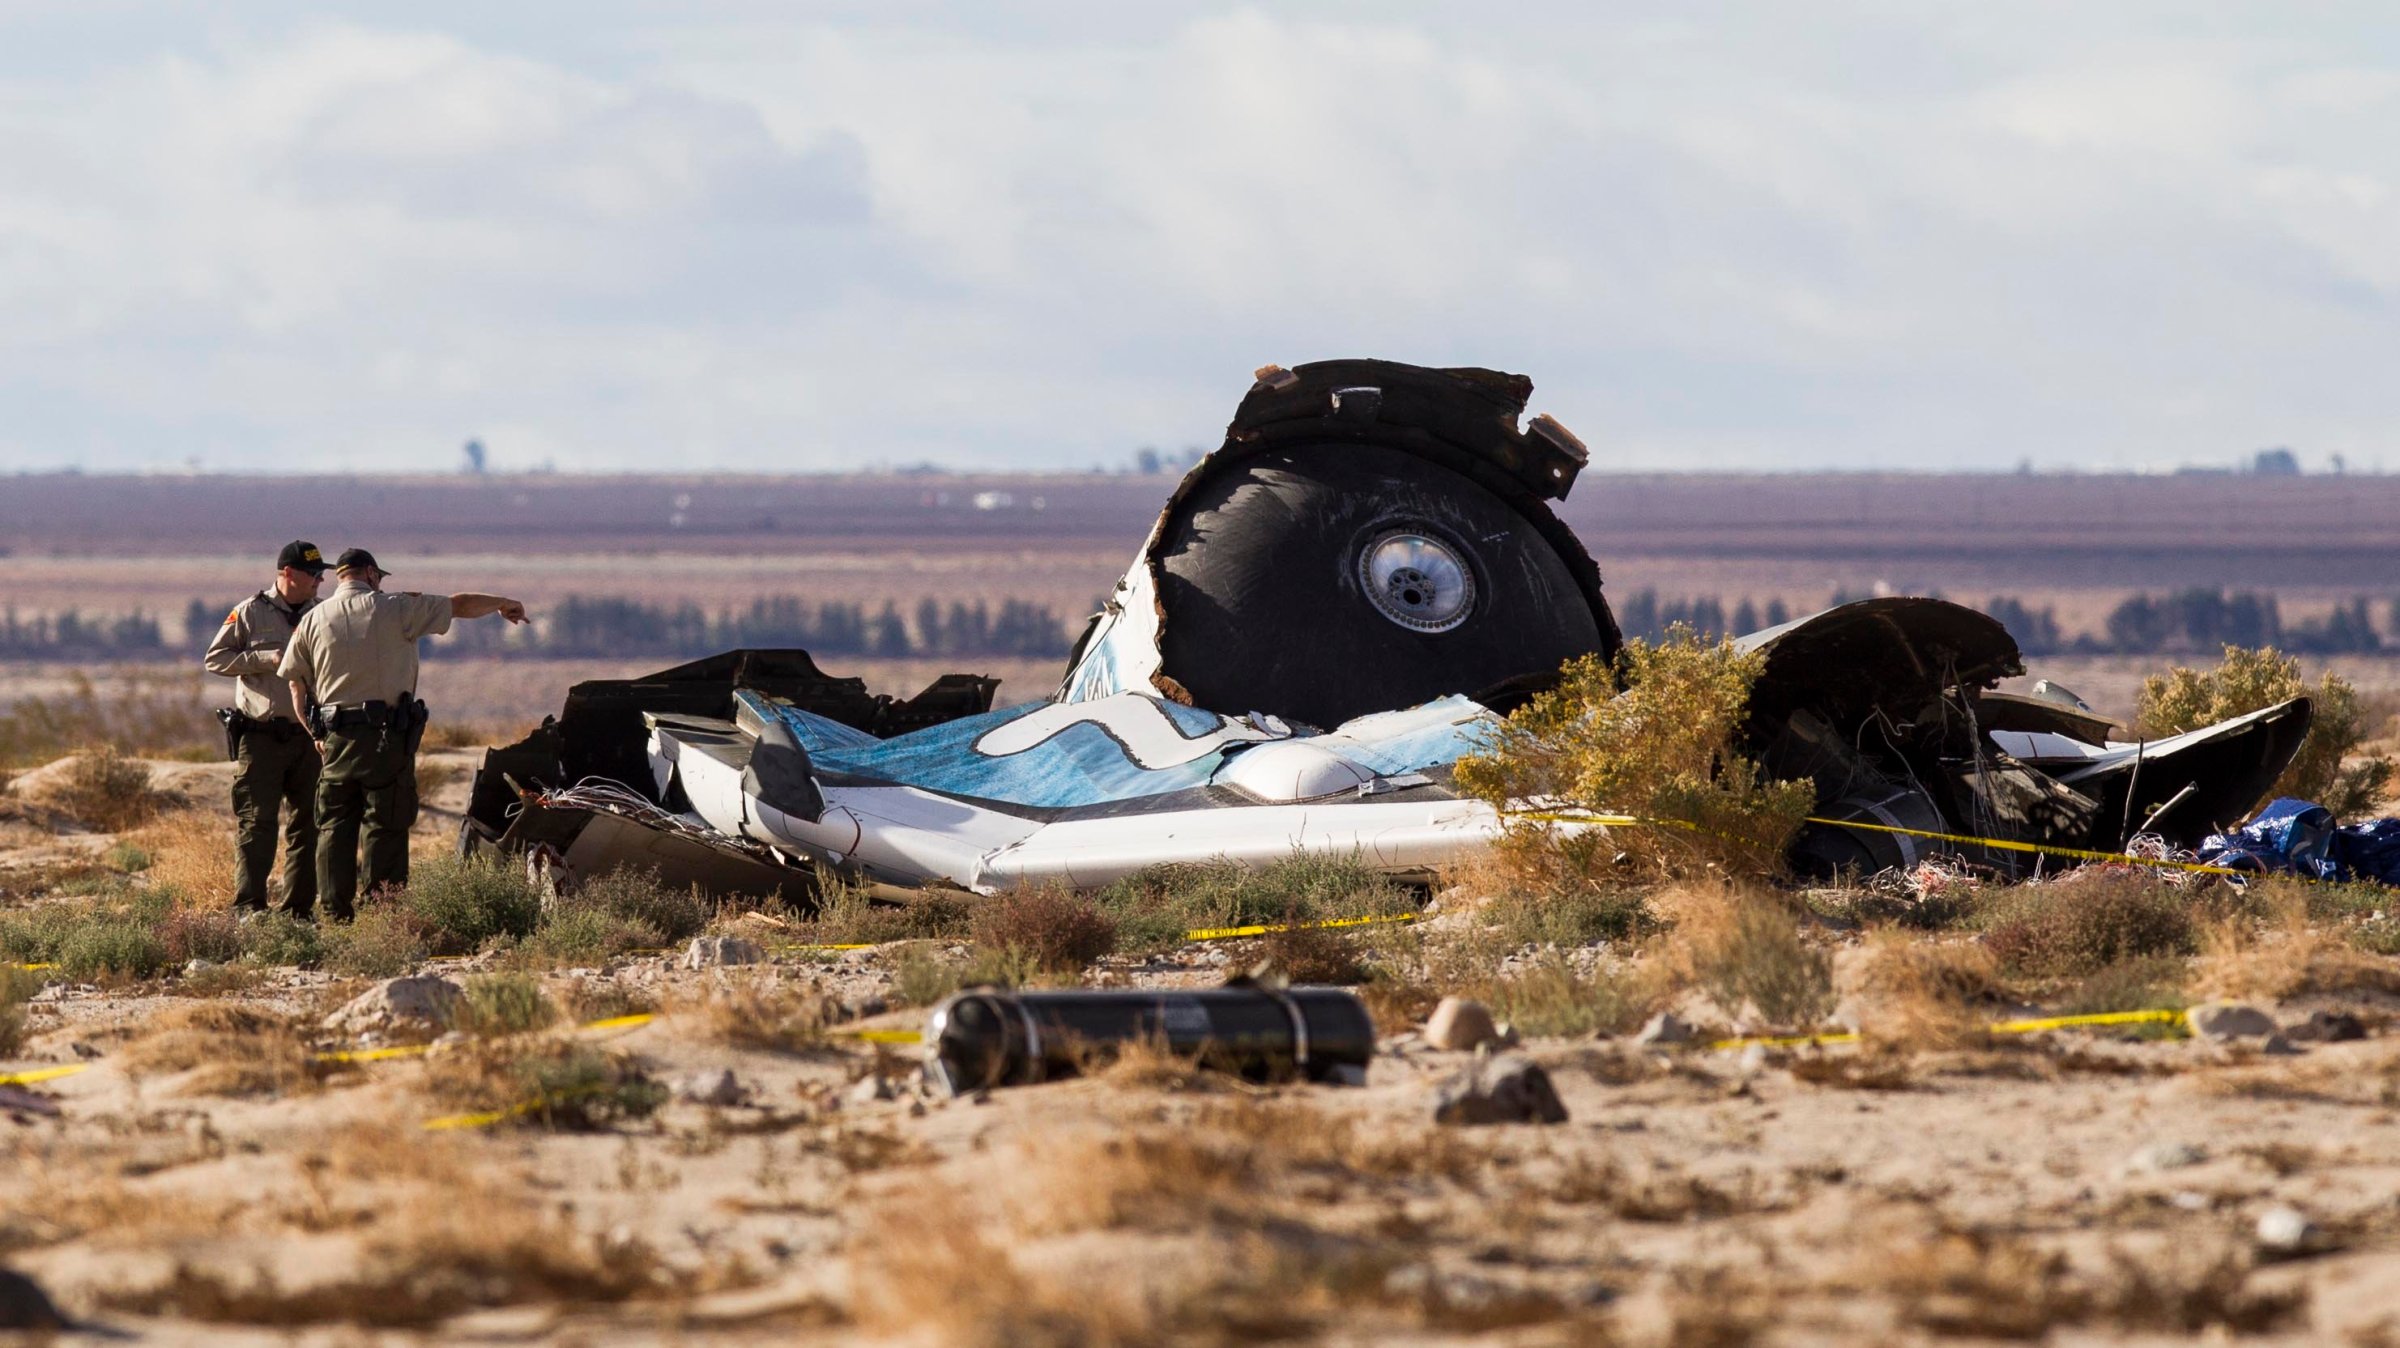 Law enforcement officers take a closer look at the wreckage near the site where a Virgin Galactic space tourism rocket, SpaceShipTwo, exploded and crashed in Mojave, Calif. on Nov 1, 2014.